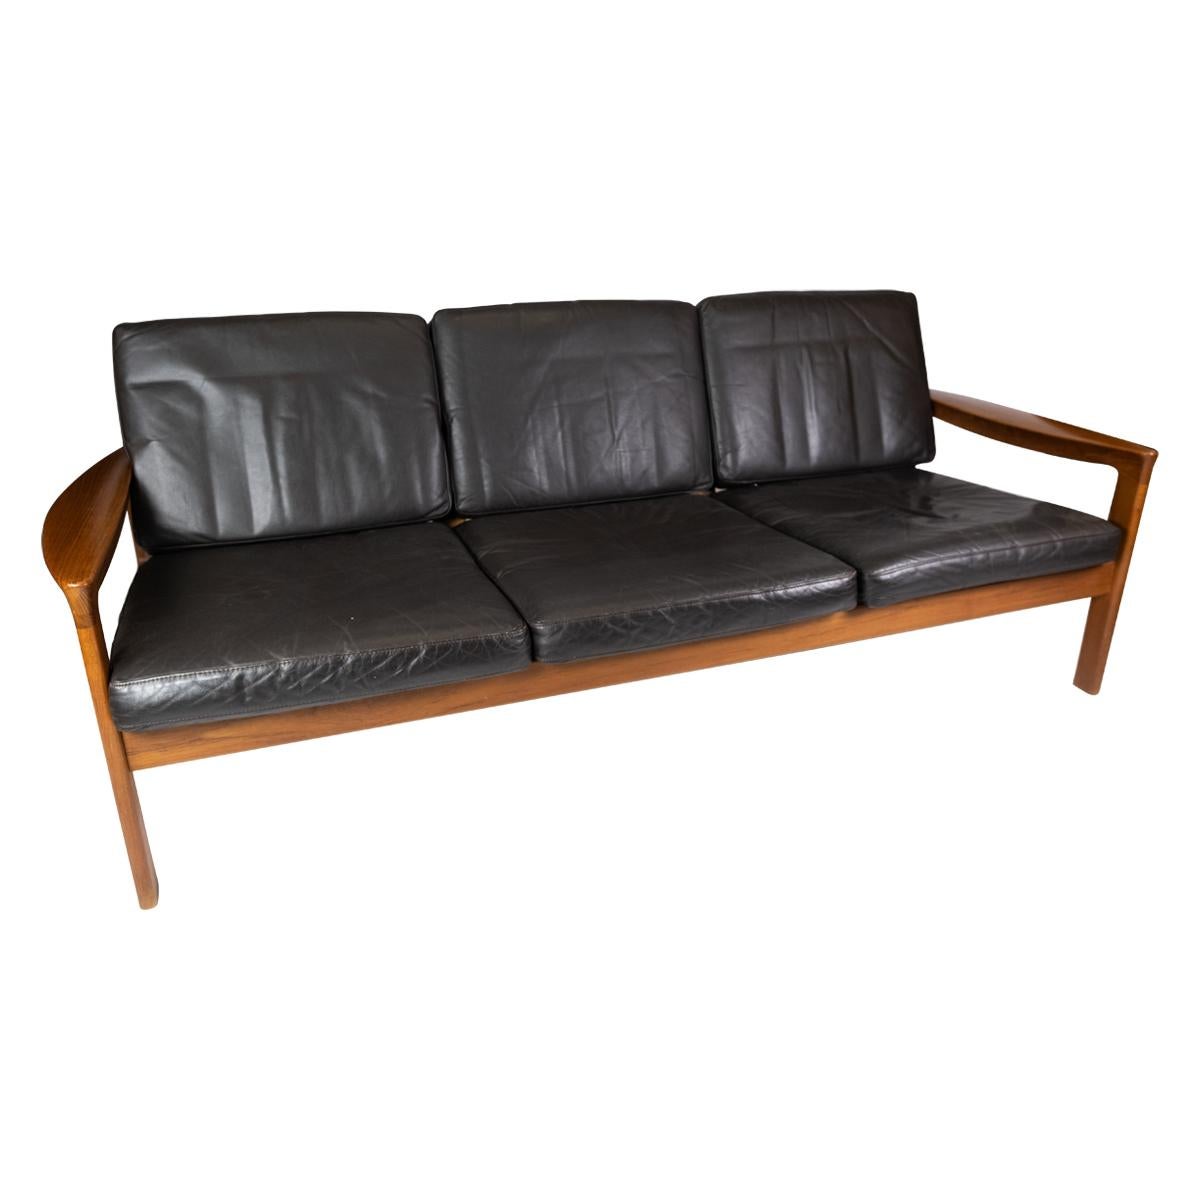 Mid-Century Modern Three Seater Sofa in Teak with Black Leather by Arne Vodder For Sale